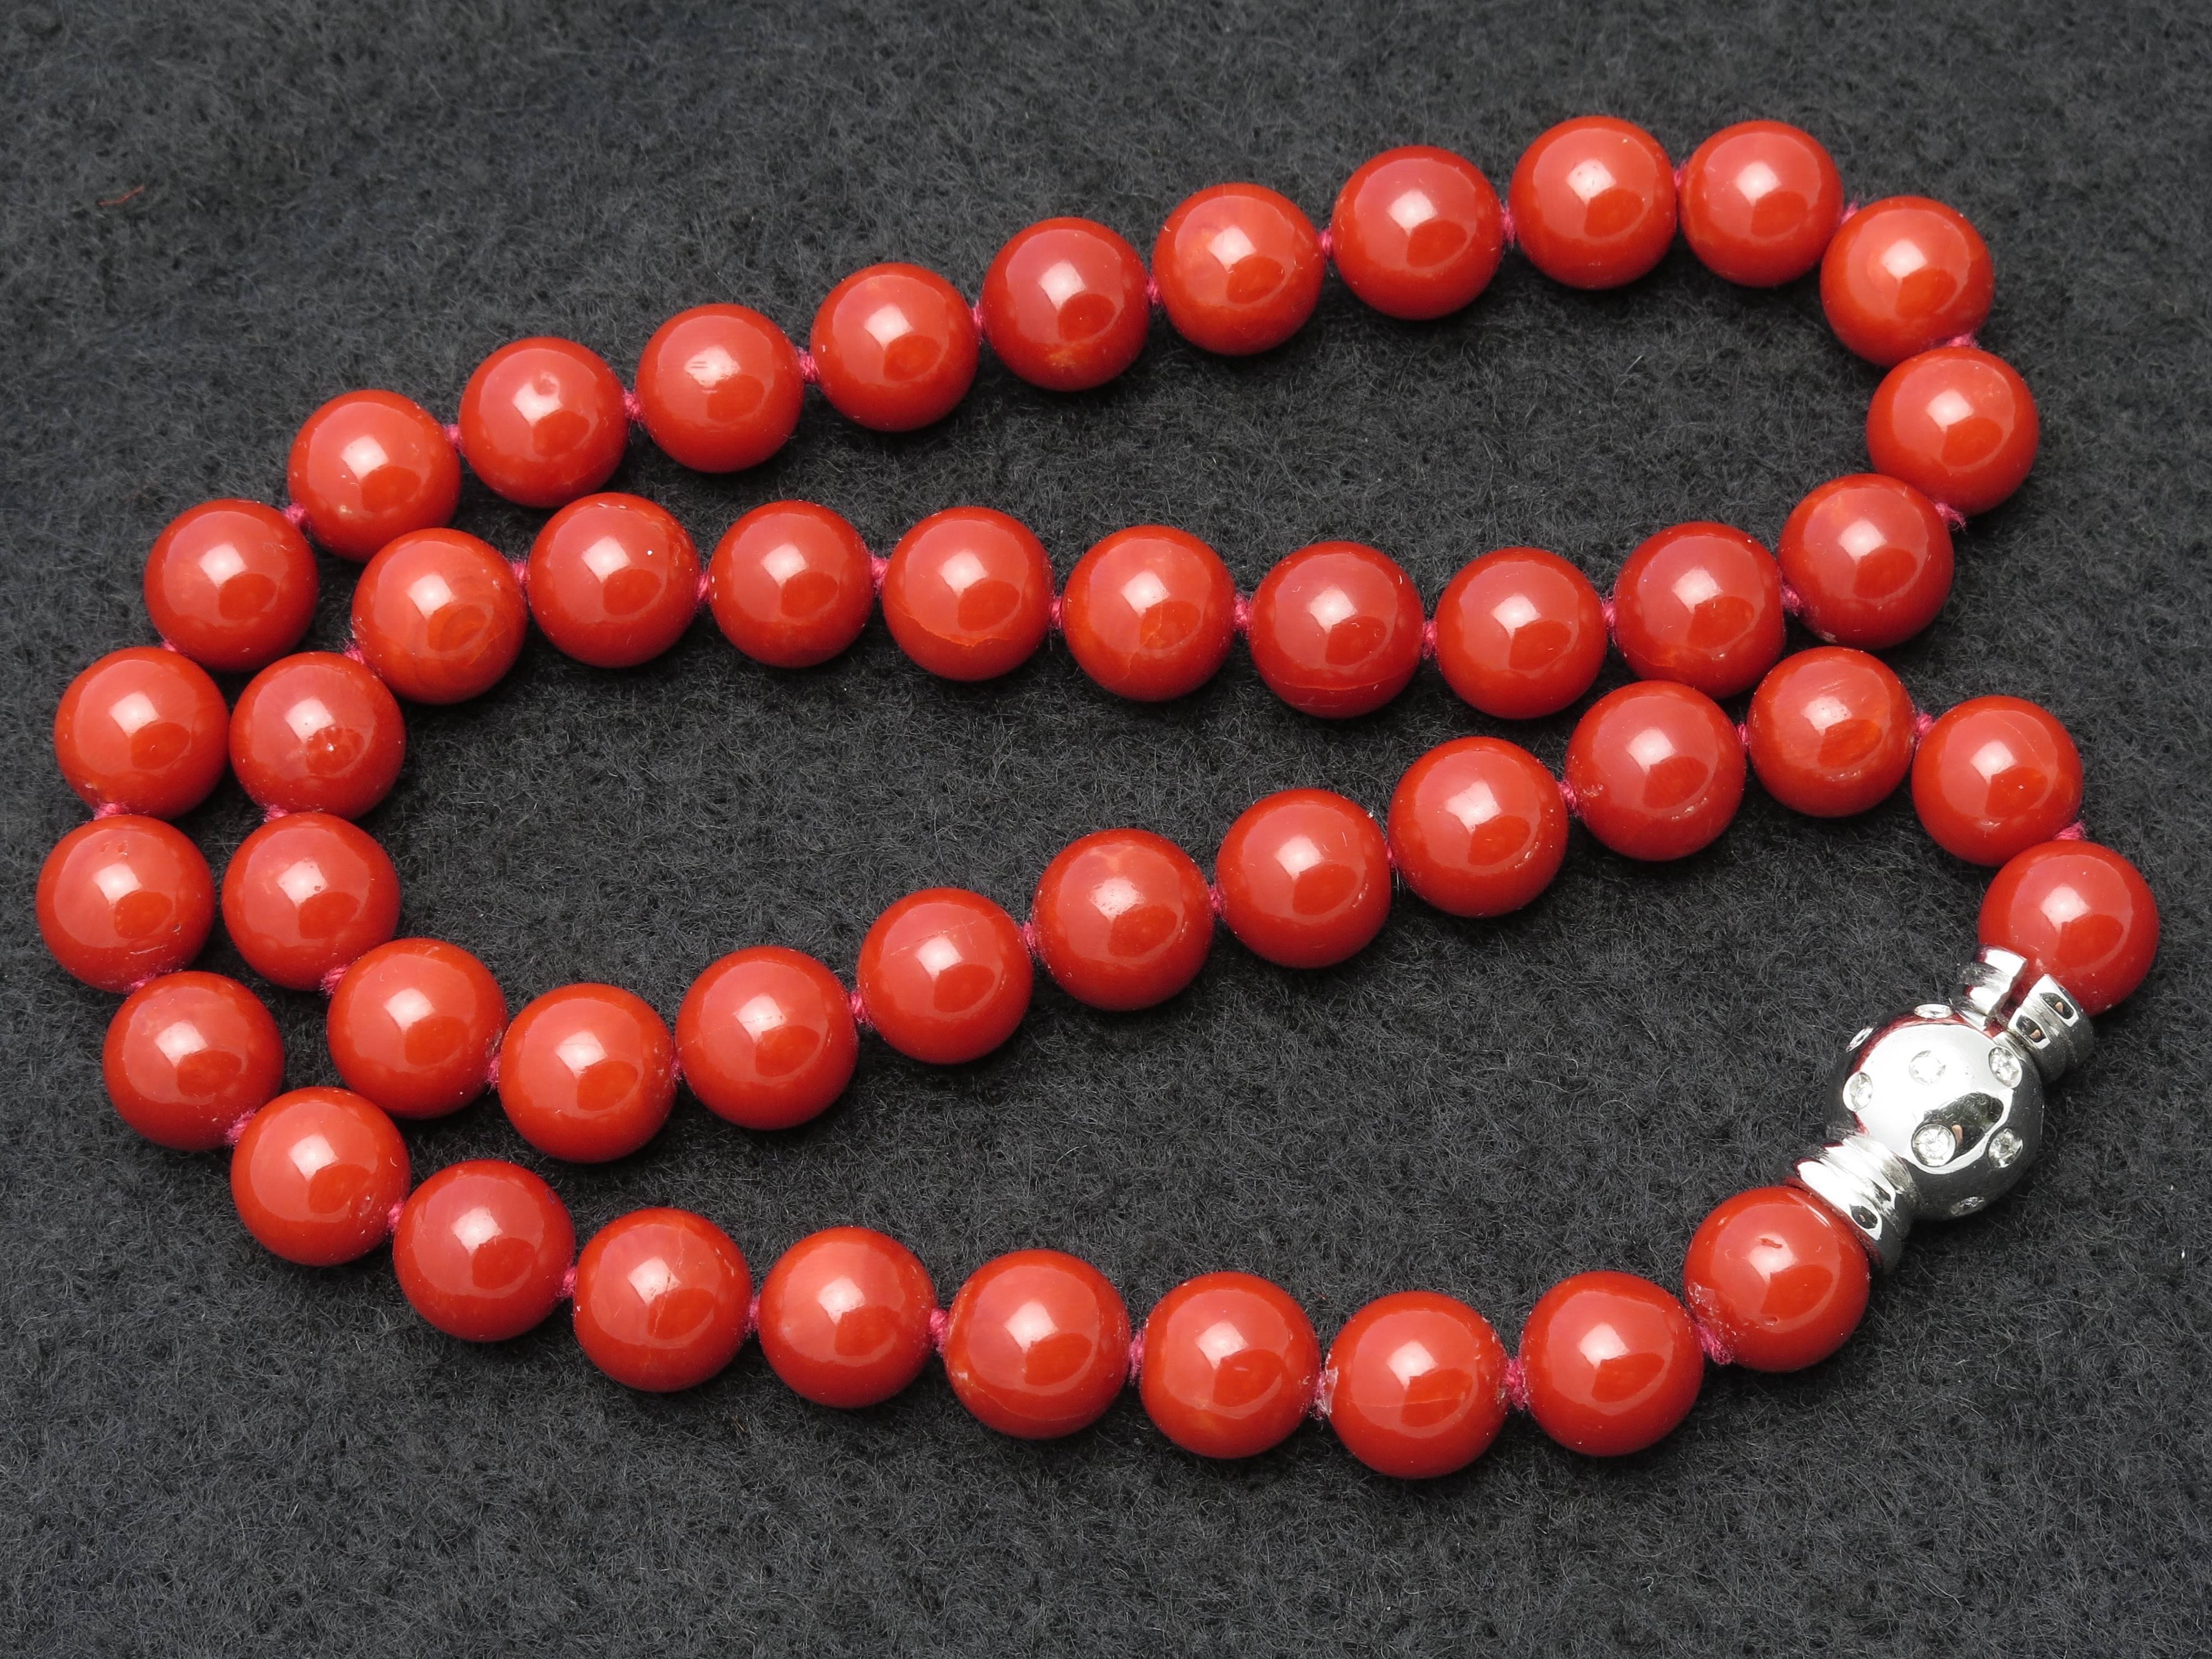 An impeccable necklace of natural Mediterranean coral (GIA certified), featuring 46 well matched beads (all approximately 9mm) of uniform deep orange red color, secured by an 18k white gold and diamond clasp. 
Beads range from 9.06 mm - 8.74mm in